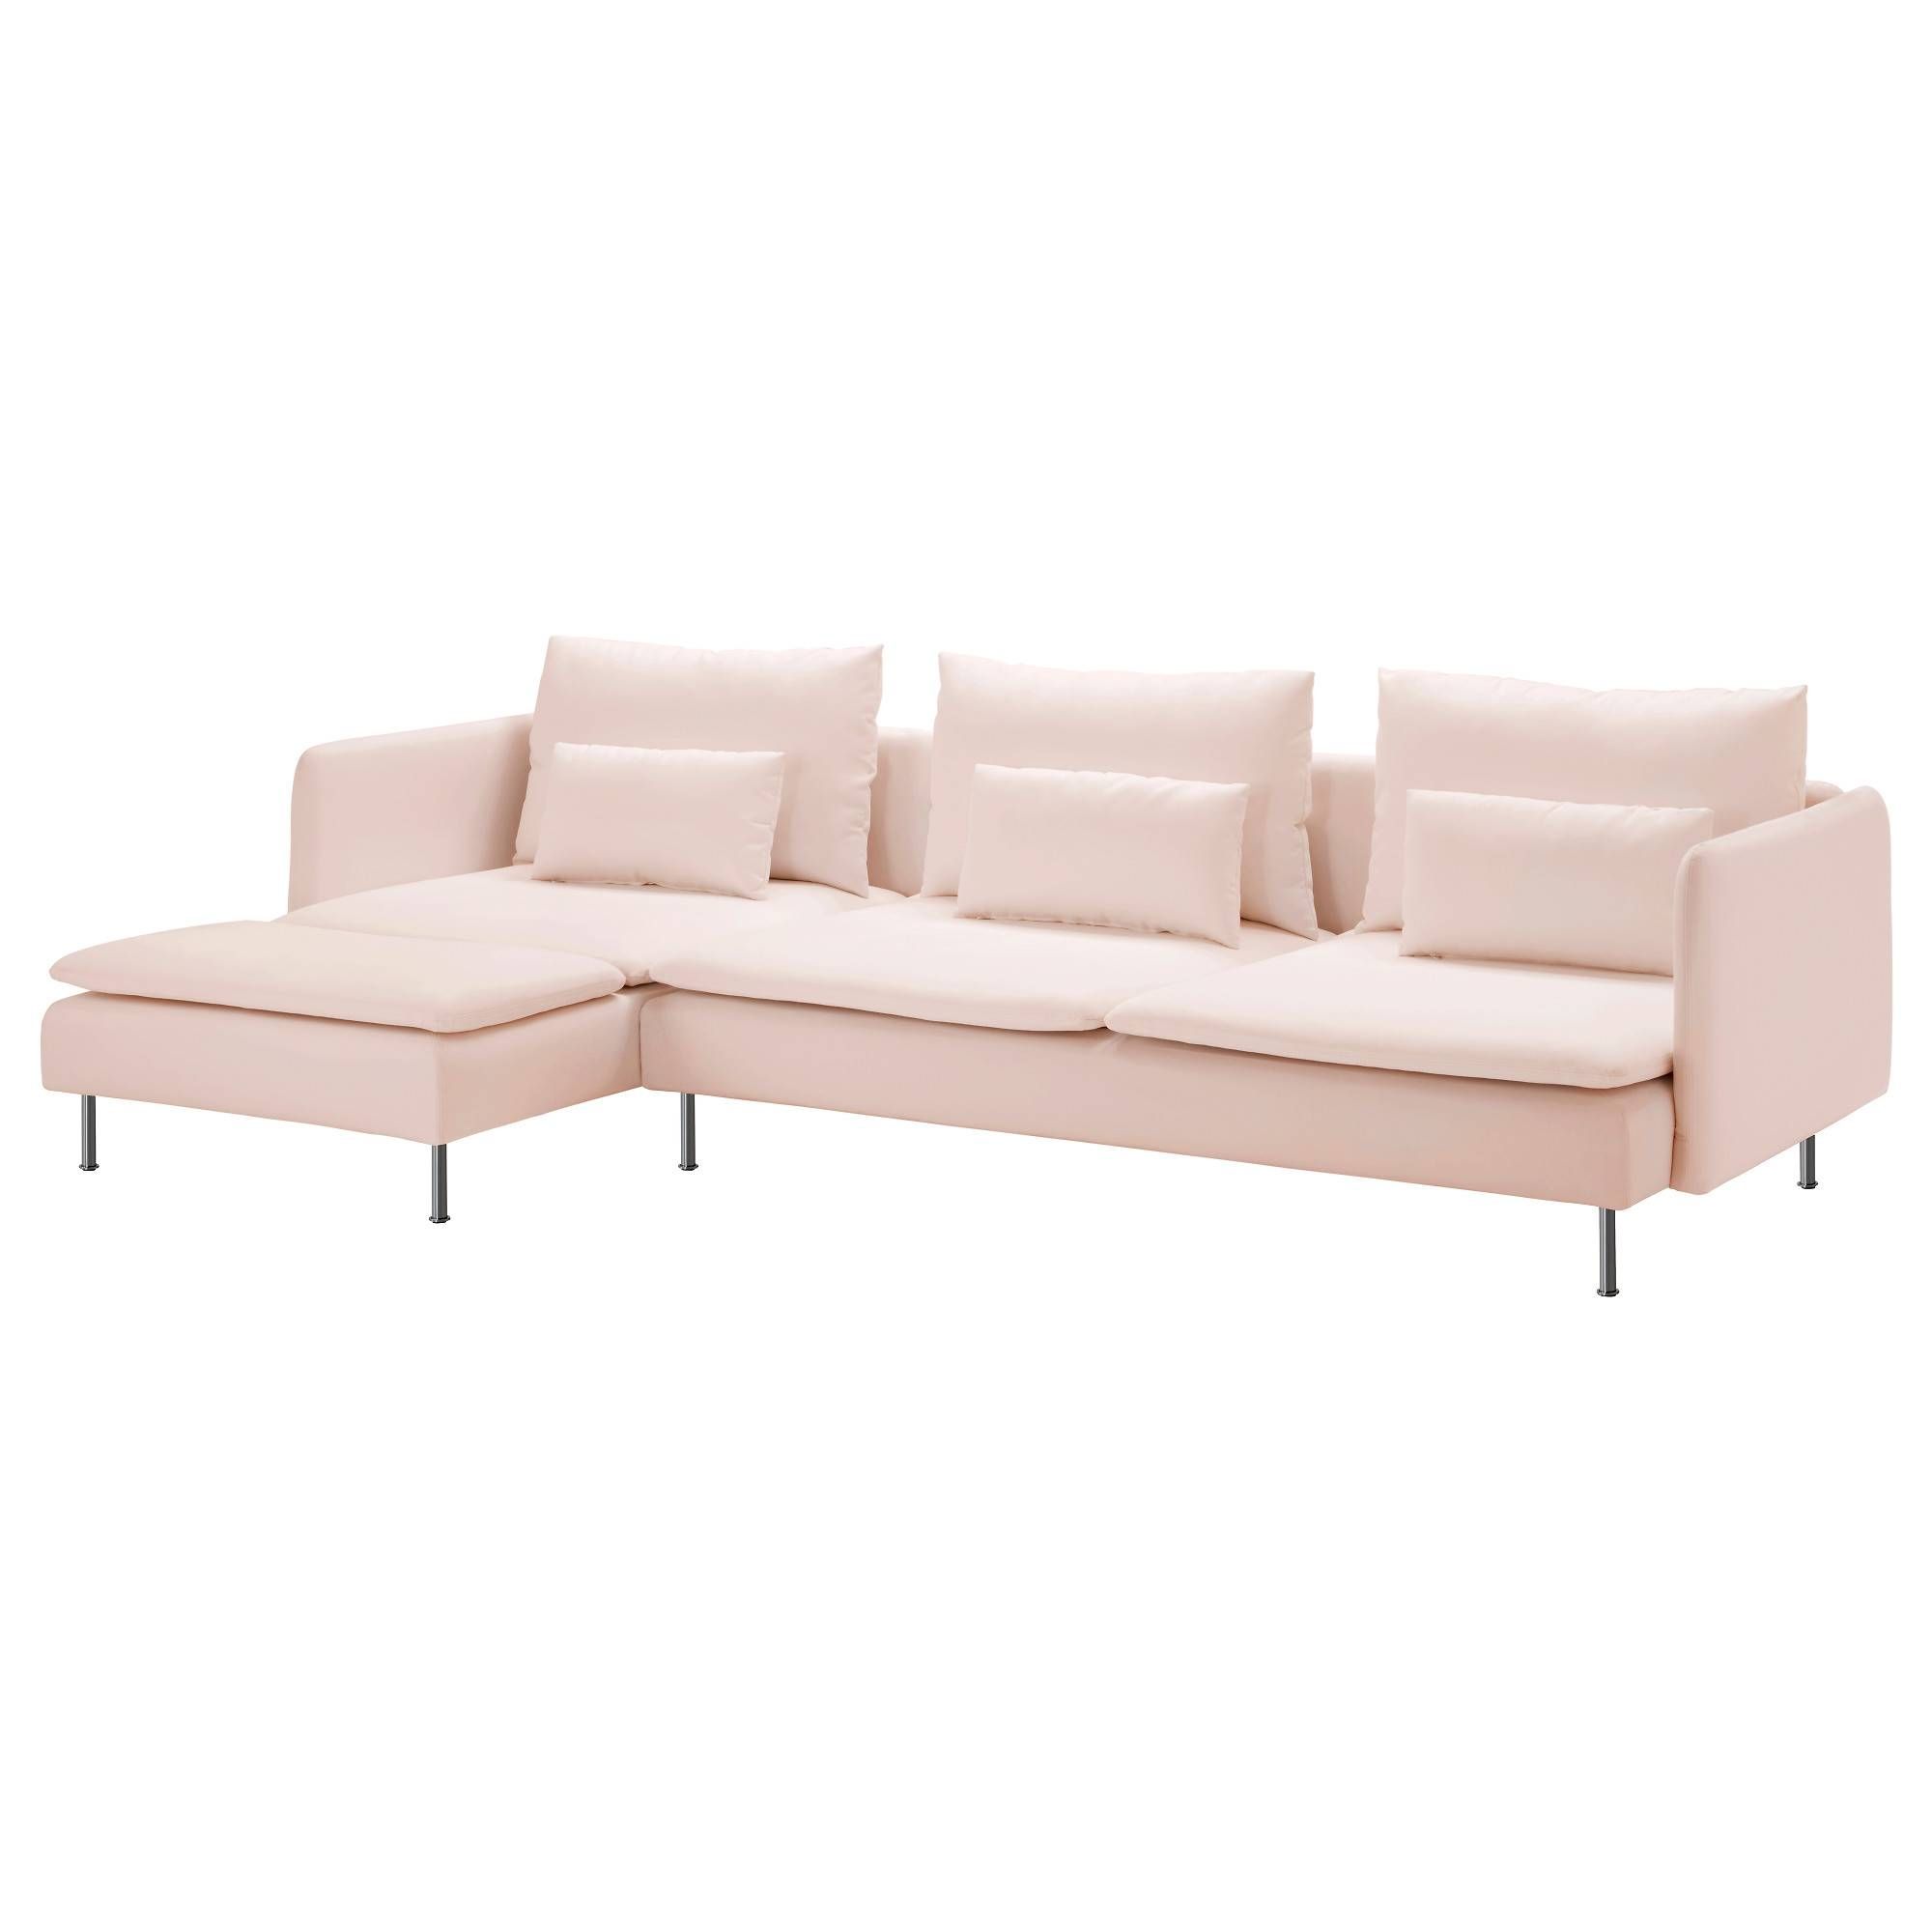 Söderhamn Three Seat Sofa And Chaise Longue Samsta Light Pink – Ikea Intended For Ikea Chaise Lounge Sofa (View 22 of 30)